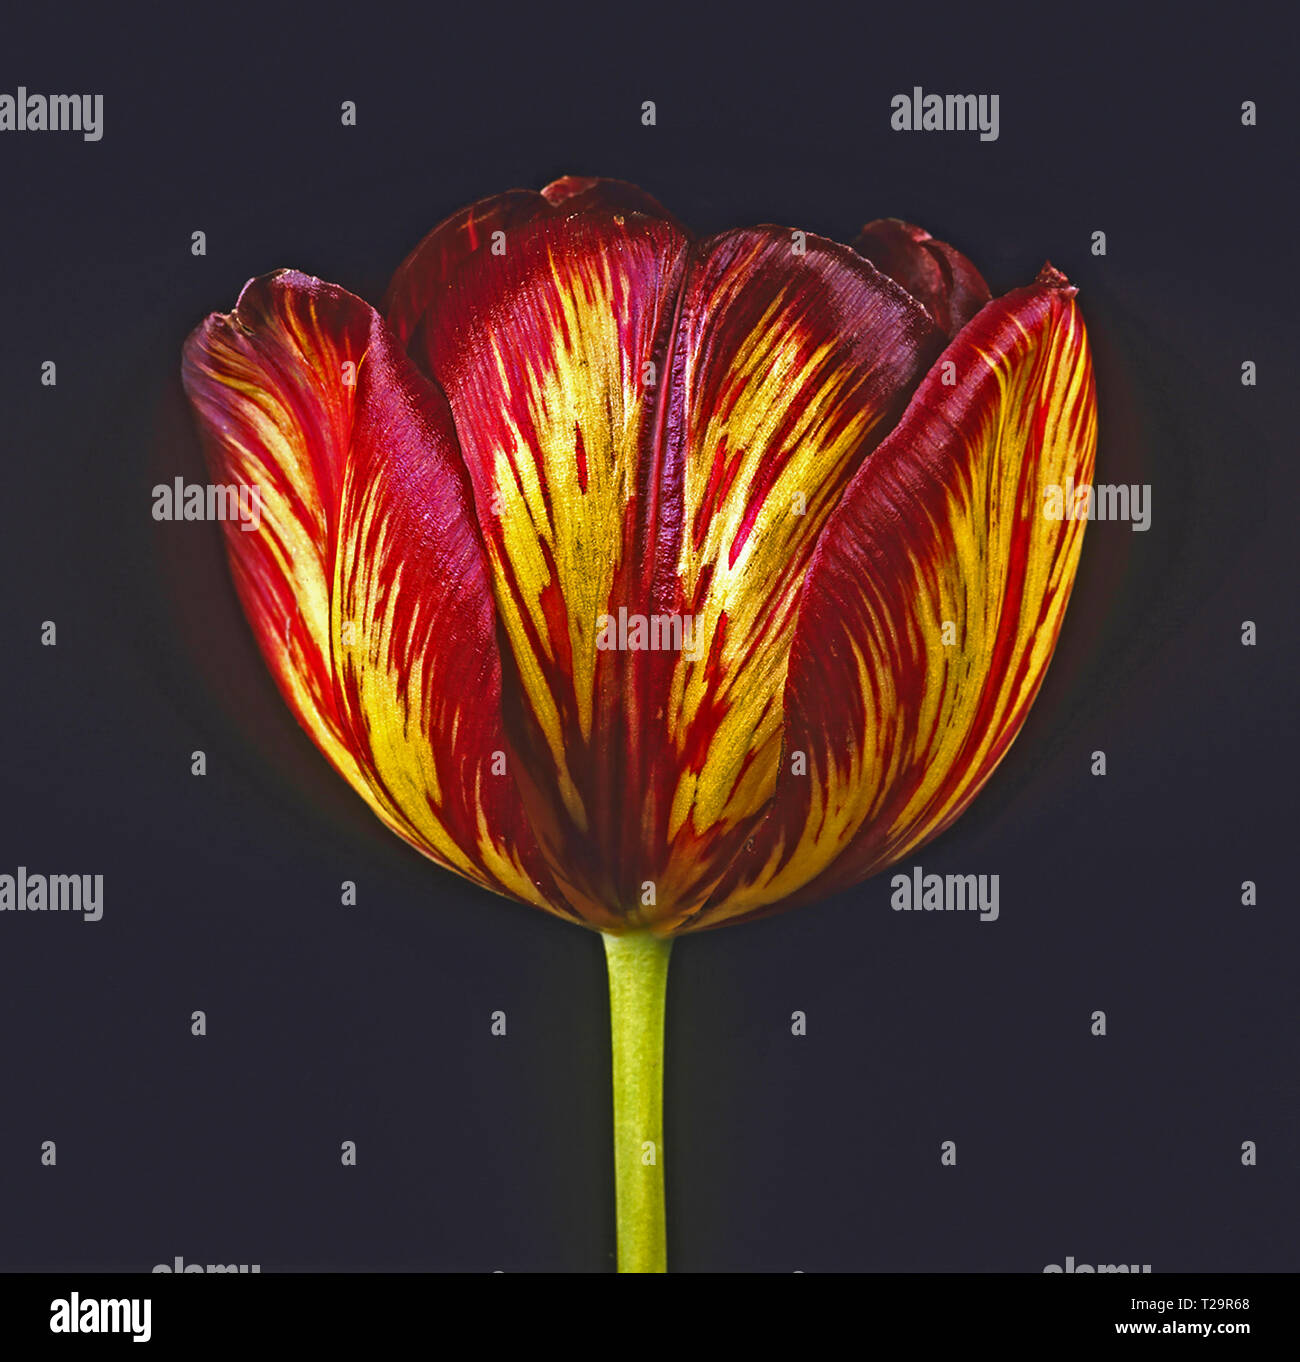 Studio portrait of the English Florist Tulip 'Lord Stanley Flame' Stock Photo